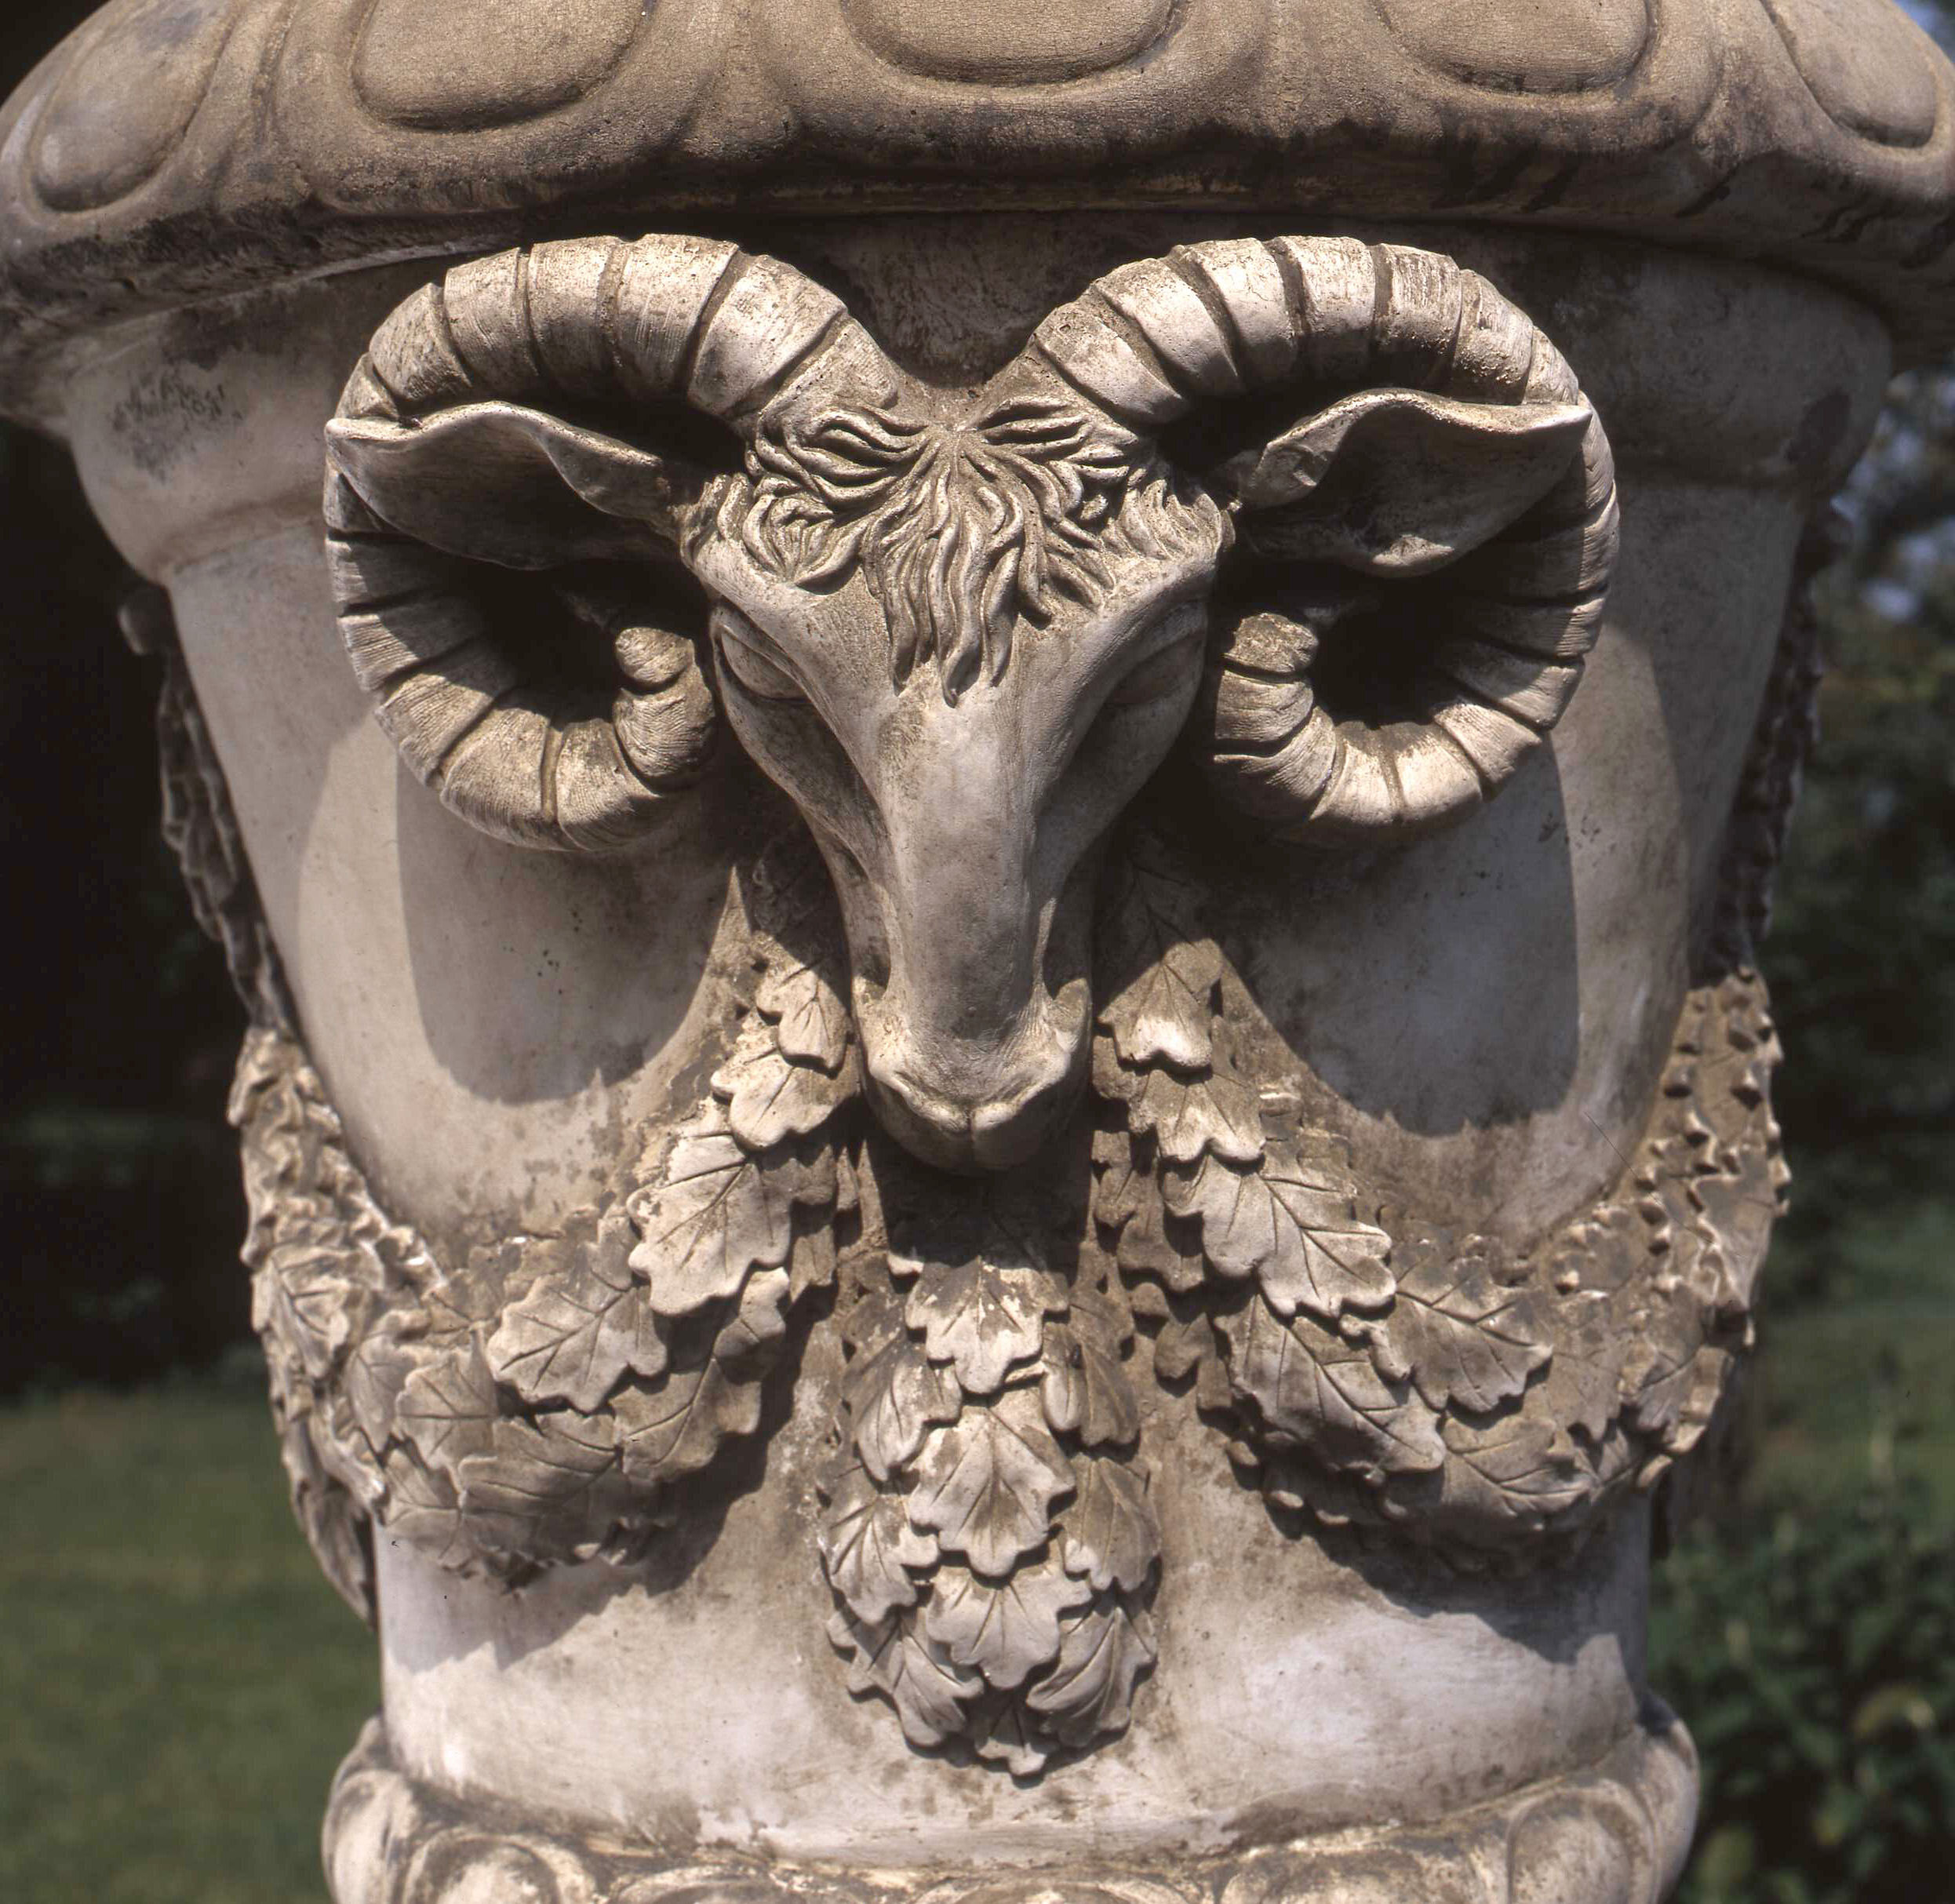  Product   Large Stone Decorative Rams Urn    Contact  